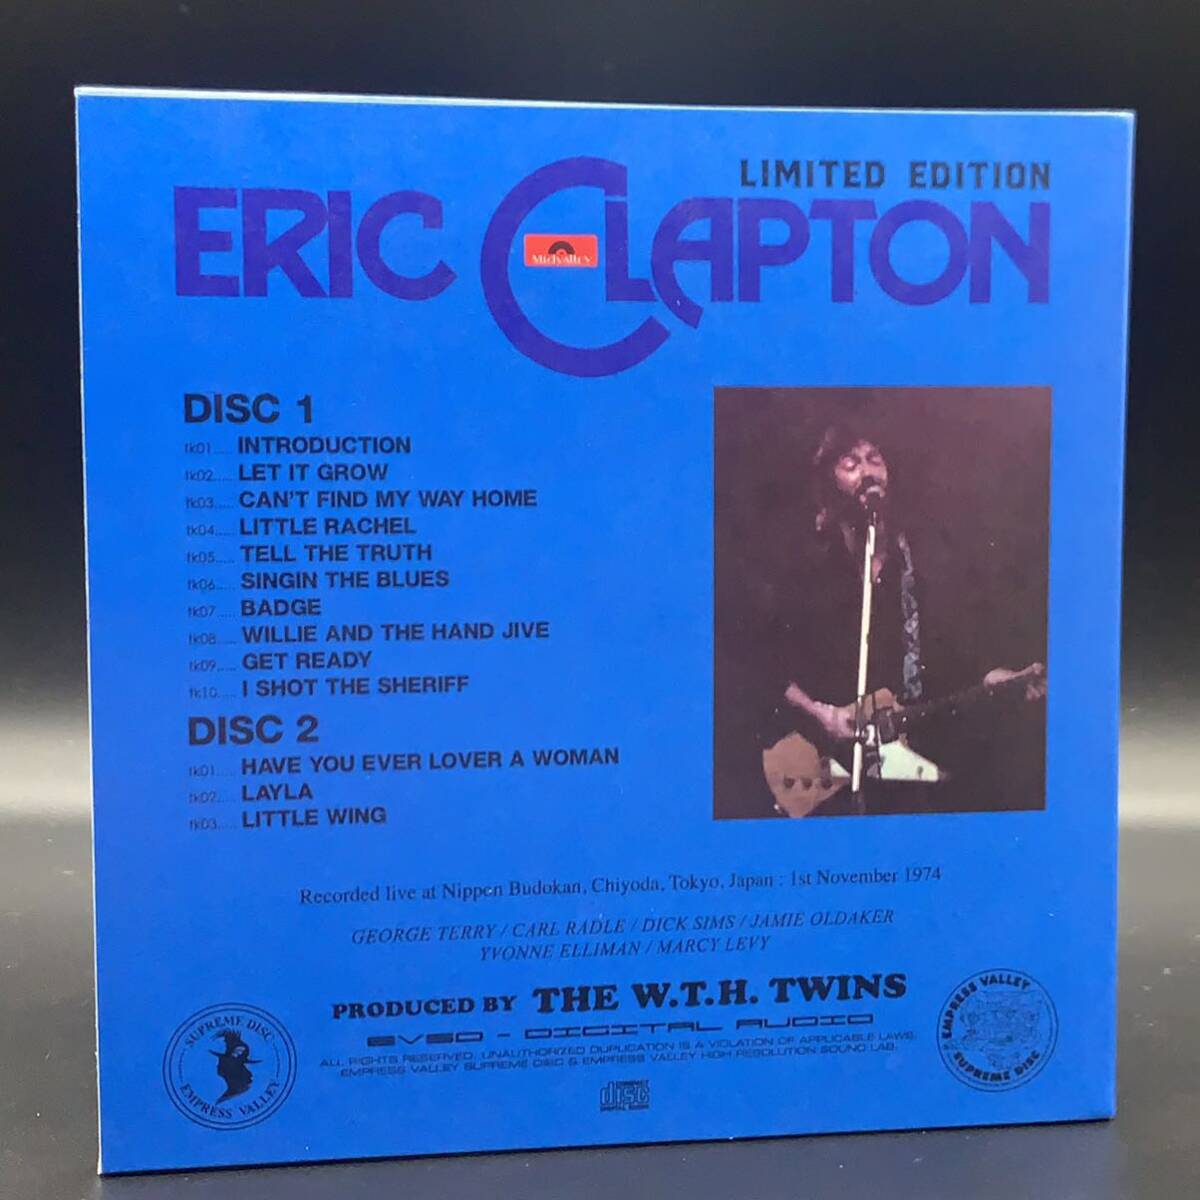 ERIC CLAPTON / TROPICAL SOUND SHOWER「亜熱帯武道館」(6CD BOX with Booklet) 初来日武道館3公演を全て初登場音源で収録した凄いやつ！の画像6